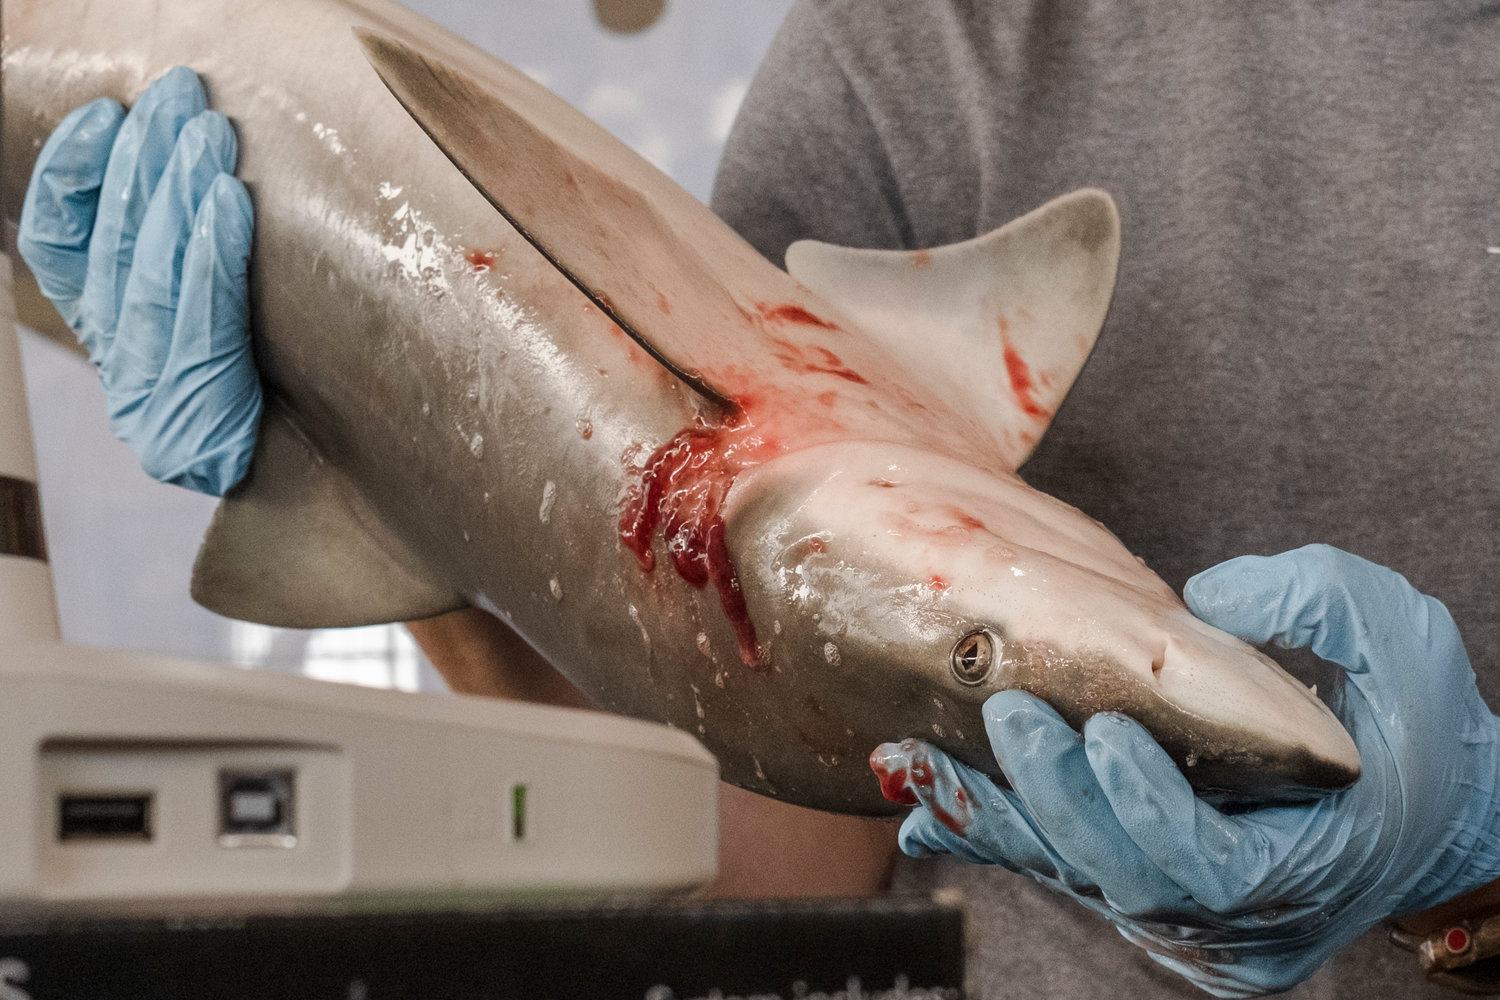 Alena Anderson, a researcher with the Mississippi State University Marine Fisheries Ecology, shows the bottom a blacknose shark prior to dissecting it for a crowd at Gulf State Park Pier as a part of Shark Week. The blacknose shark is one of the most common sharks found on the Alabama Gulf Coast and can reach sizes up to five feet.